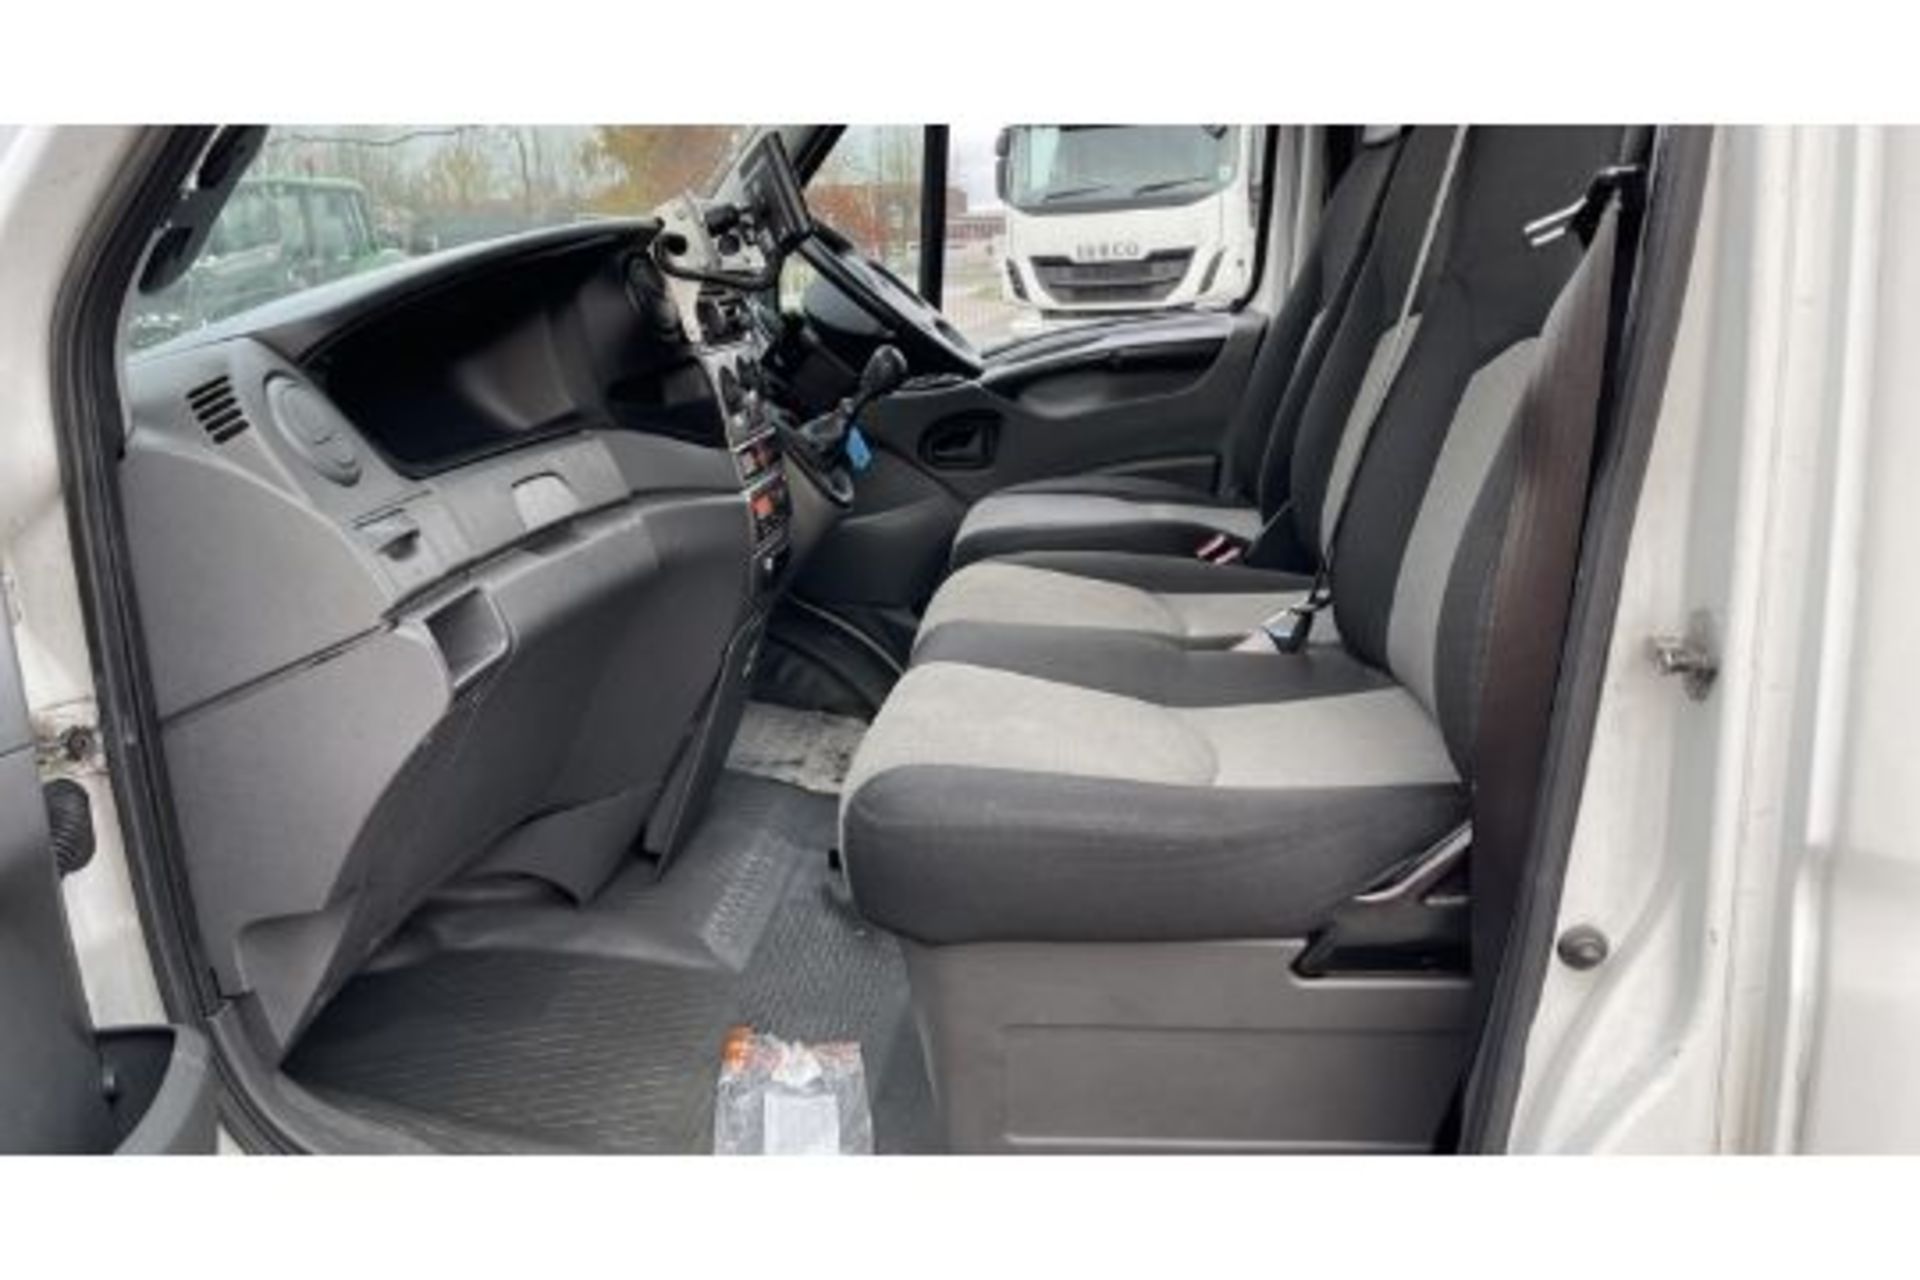 2011 IVECO DAILY 50C14 - Image 11 of 26